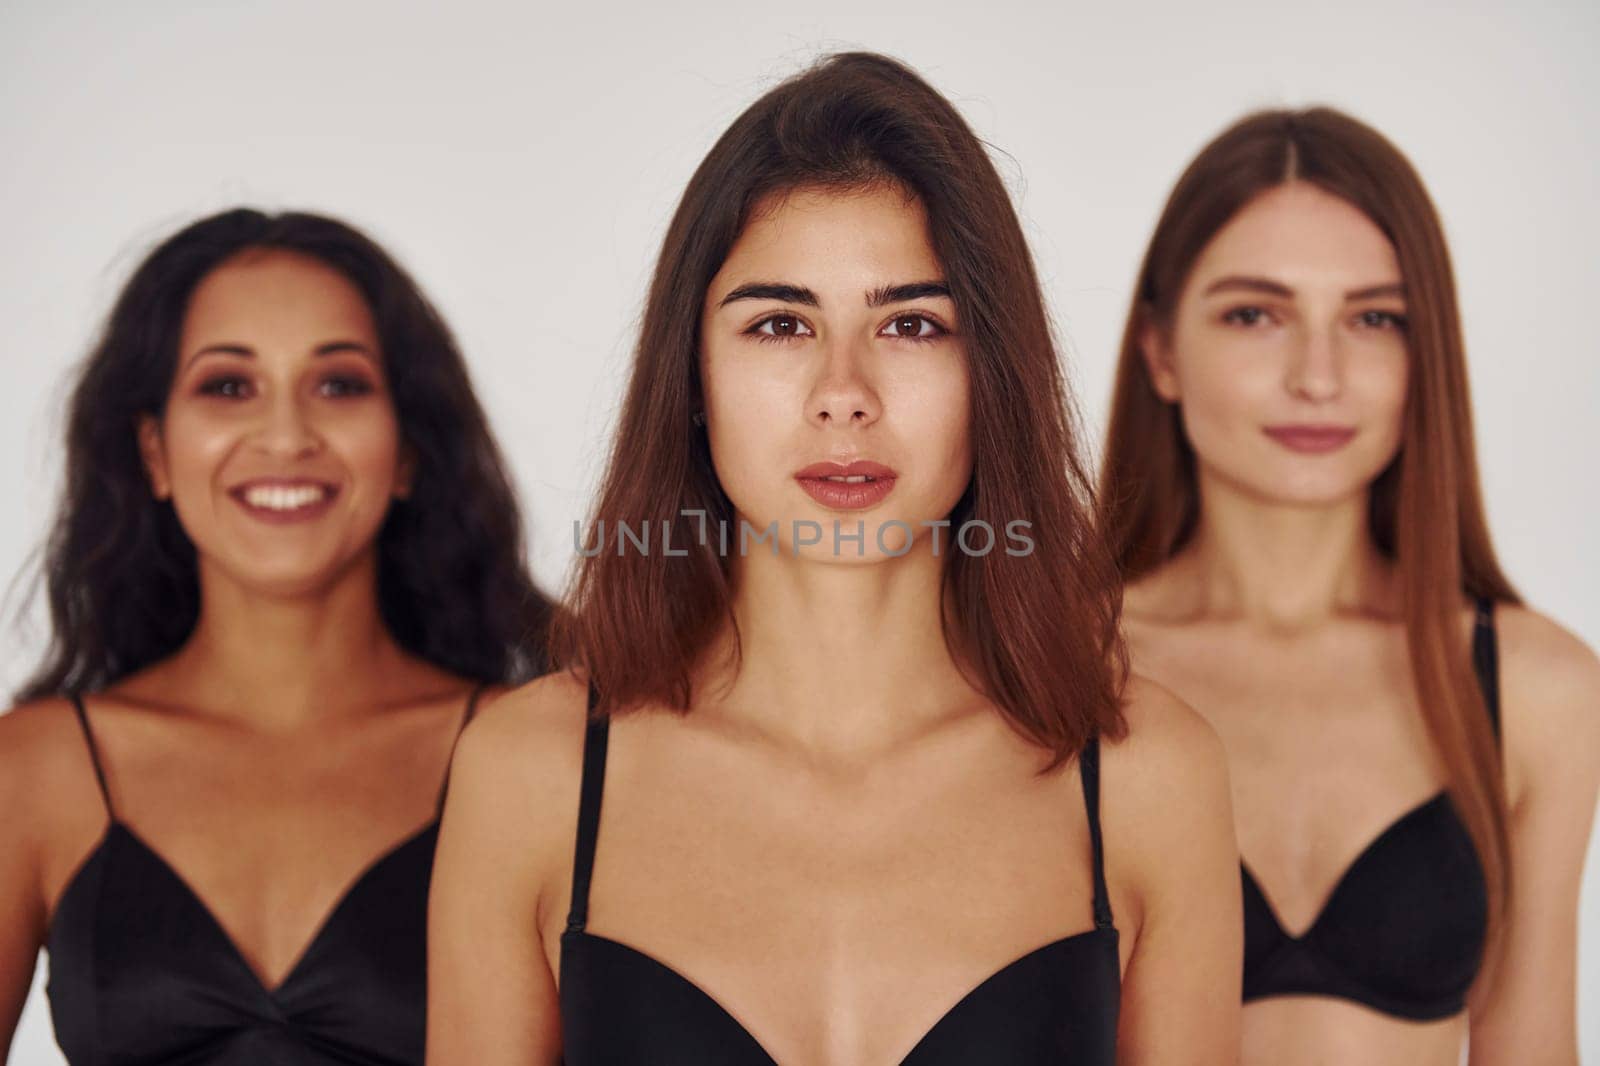 In black bra. Three young women in lingerie together indoors. White background.